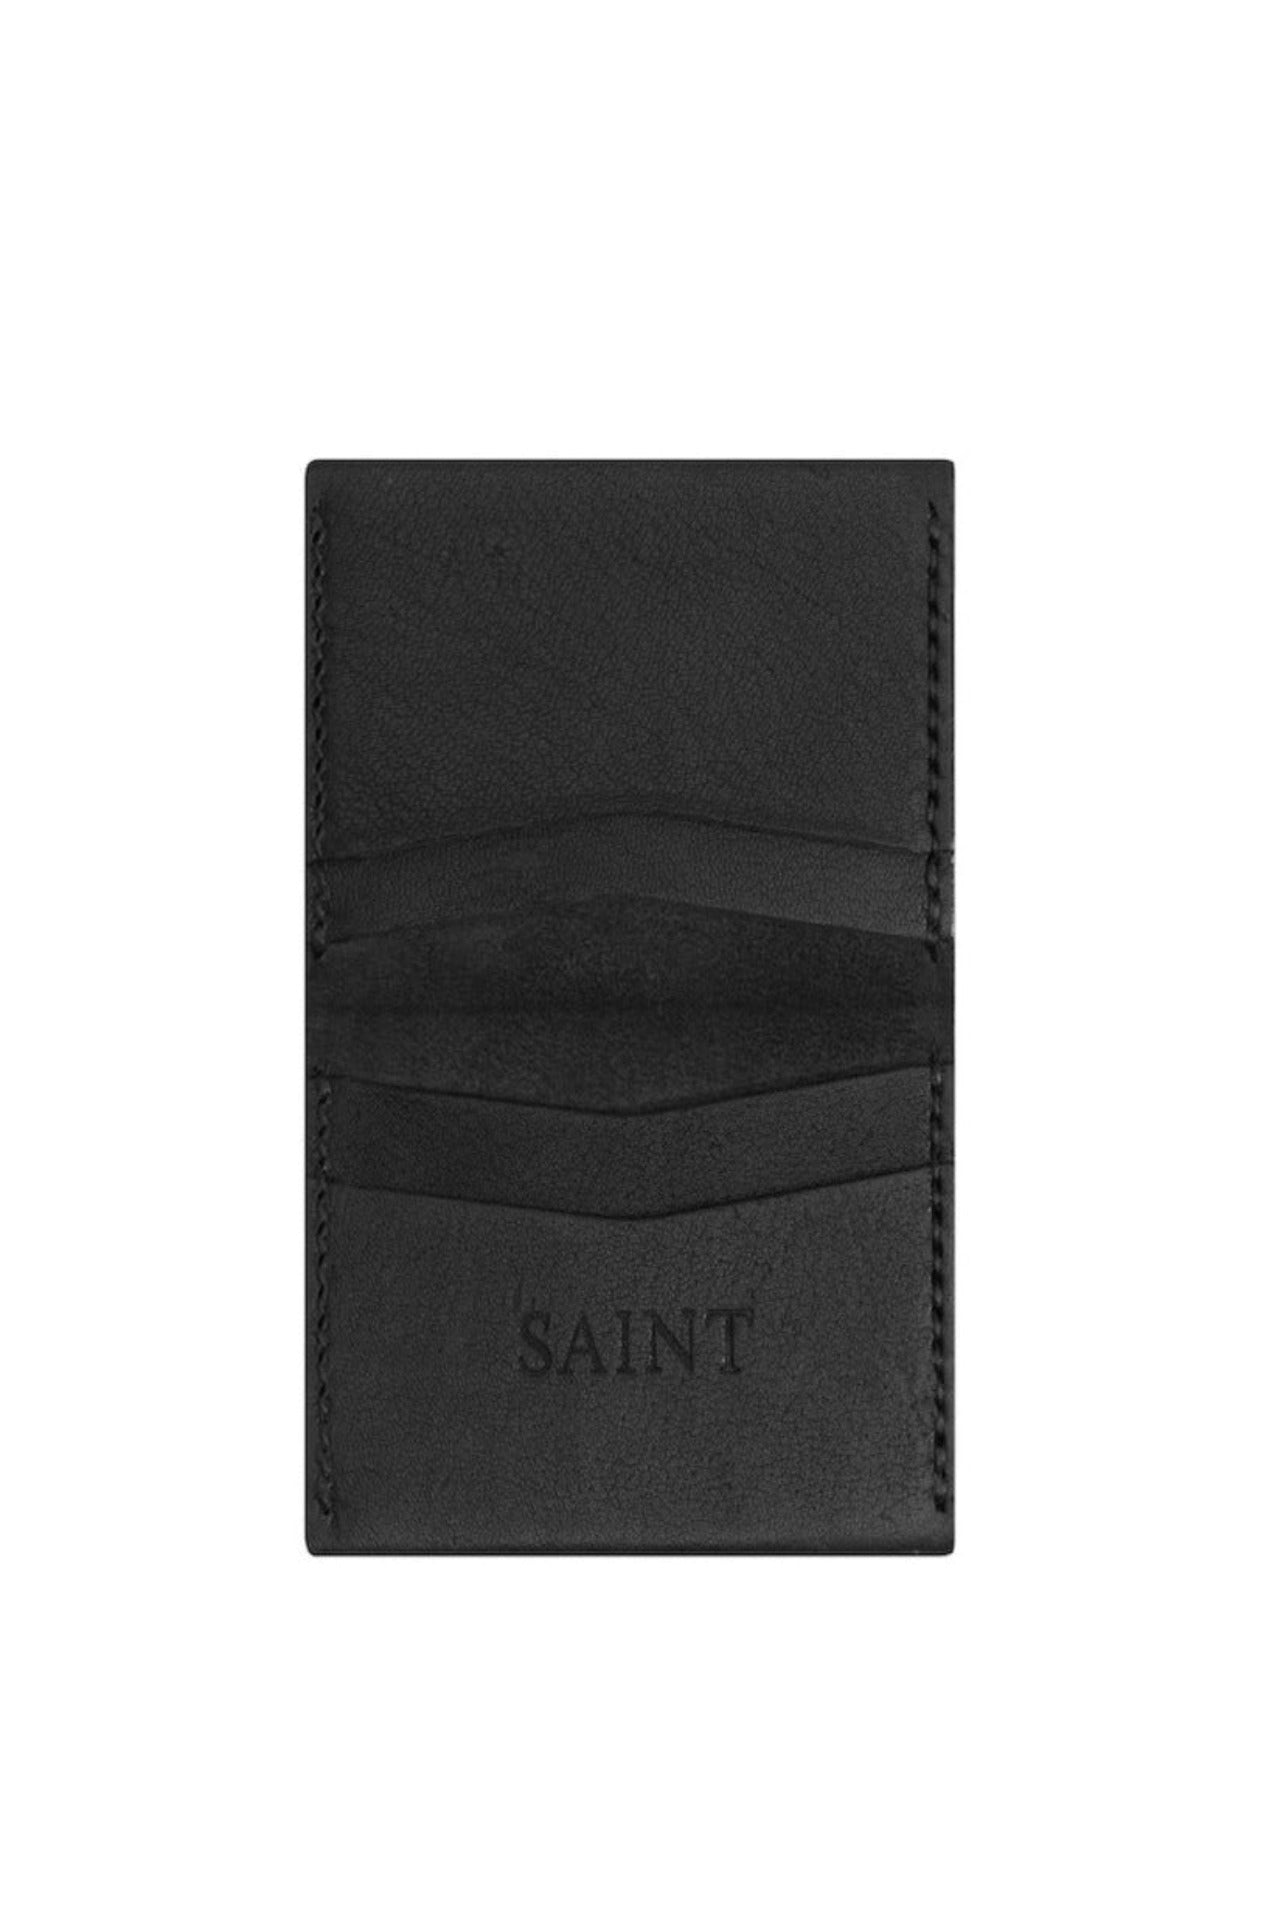 Slimline leather wallet. made in Australia using traditional leather smith techniques. 100% leather